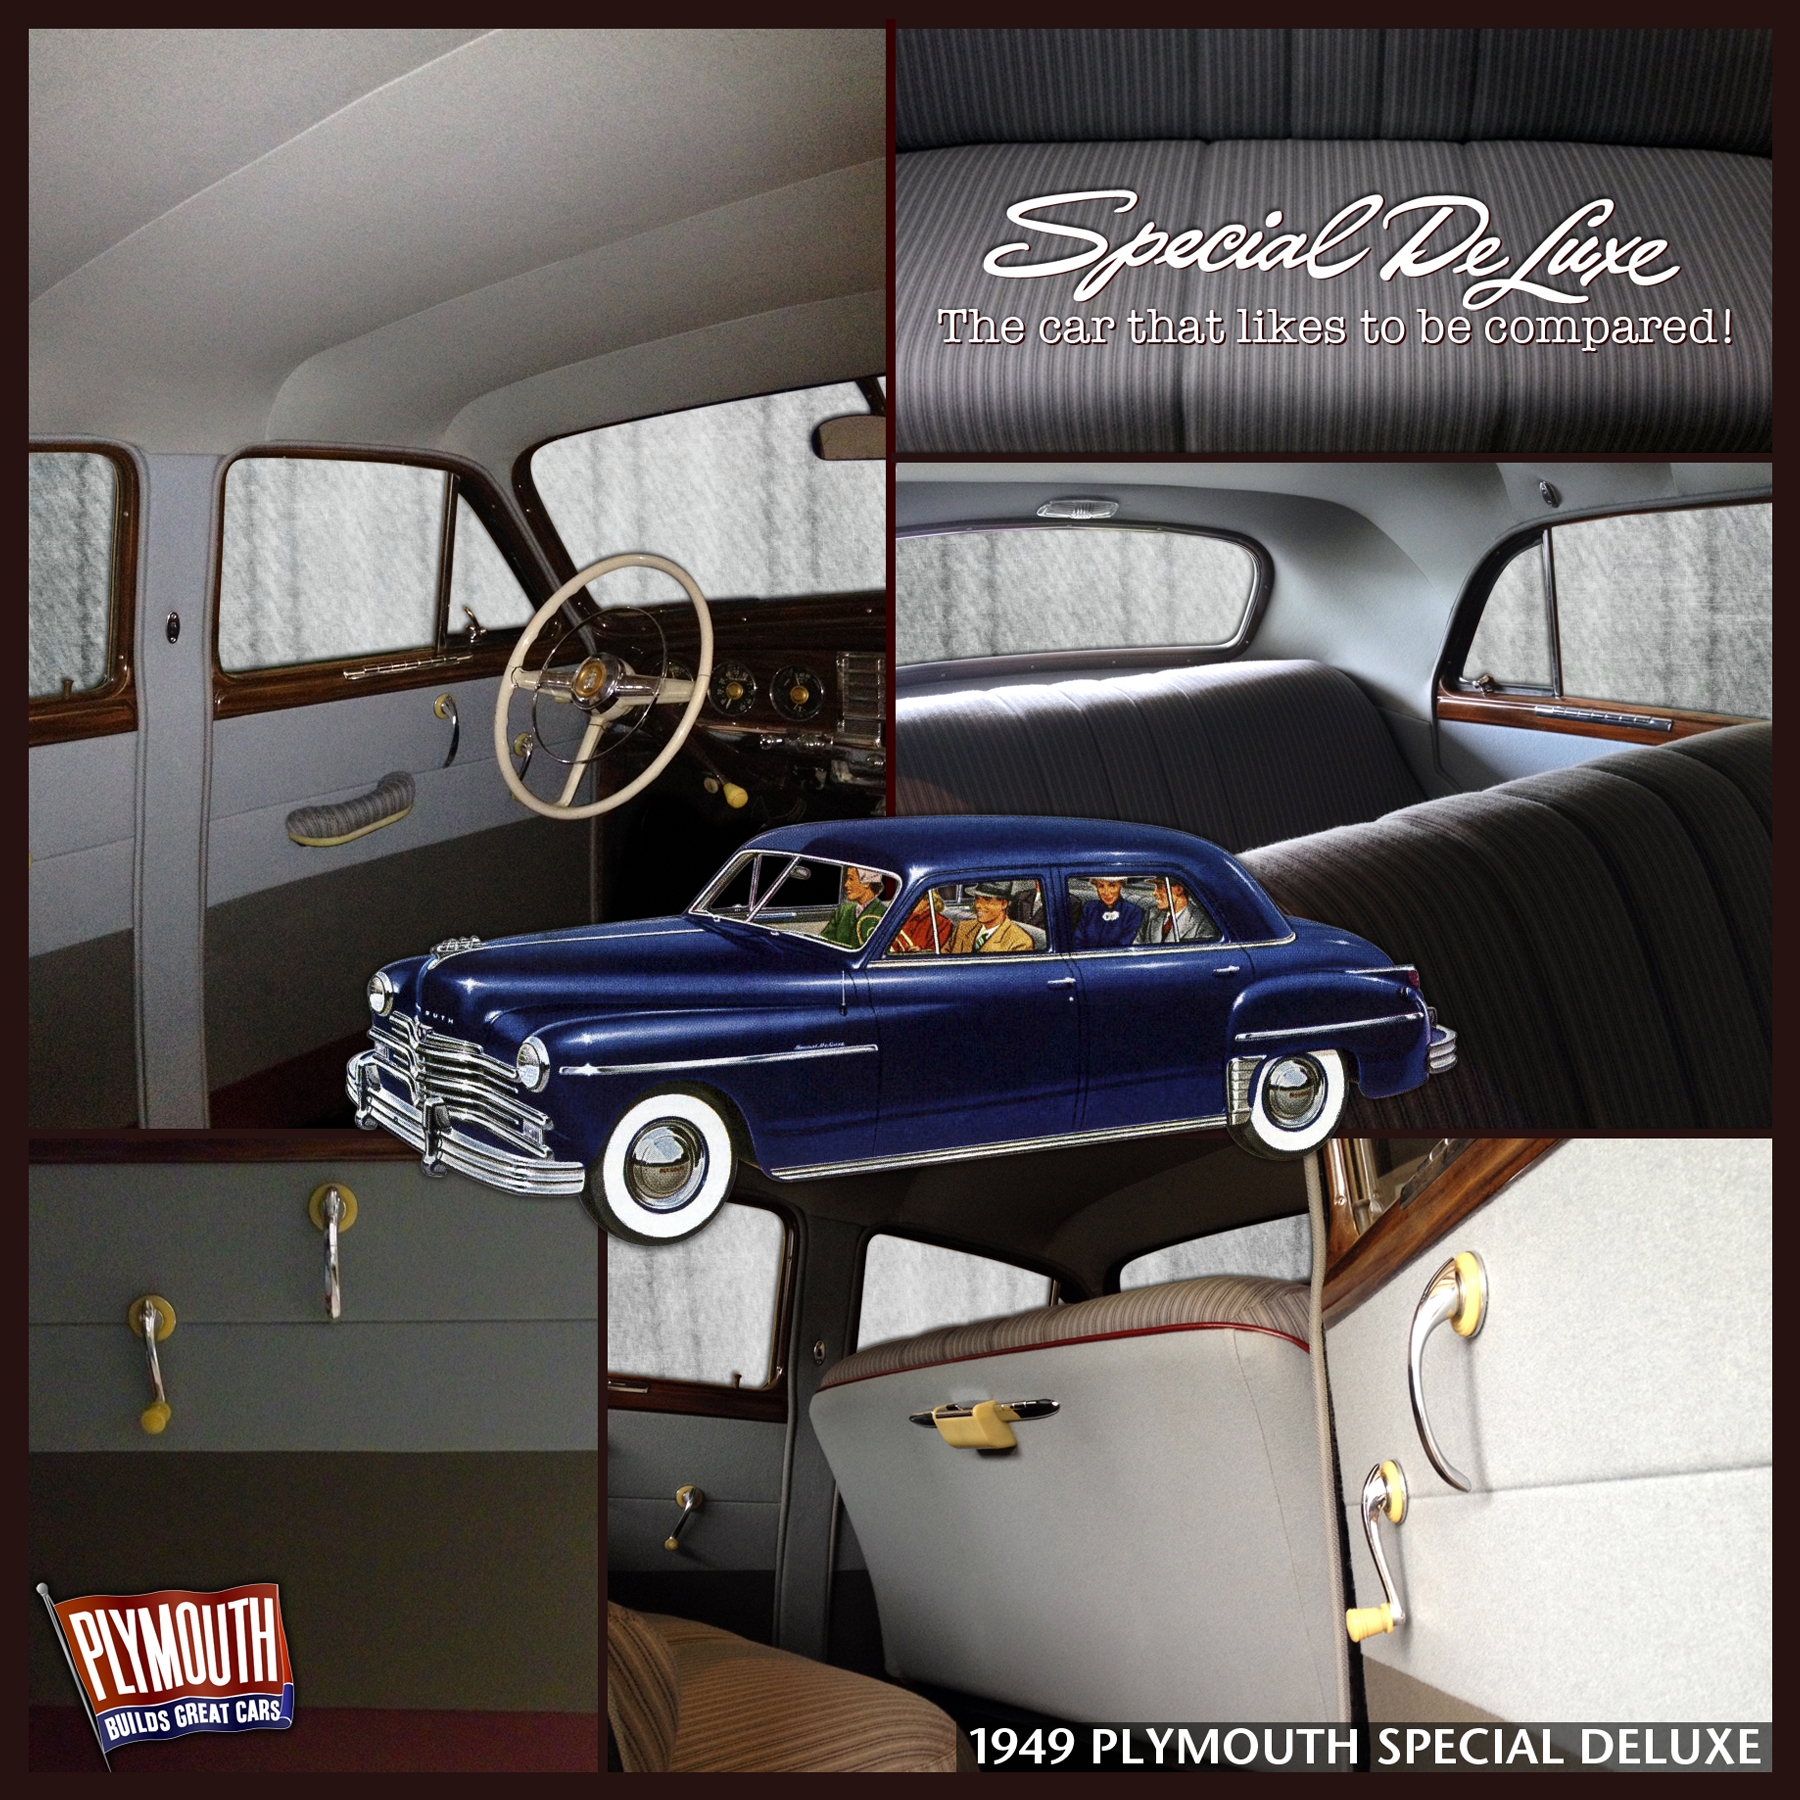 1949 Plymouth Special Deluxe - Automotive Fabric Repair